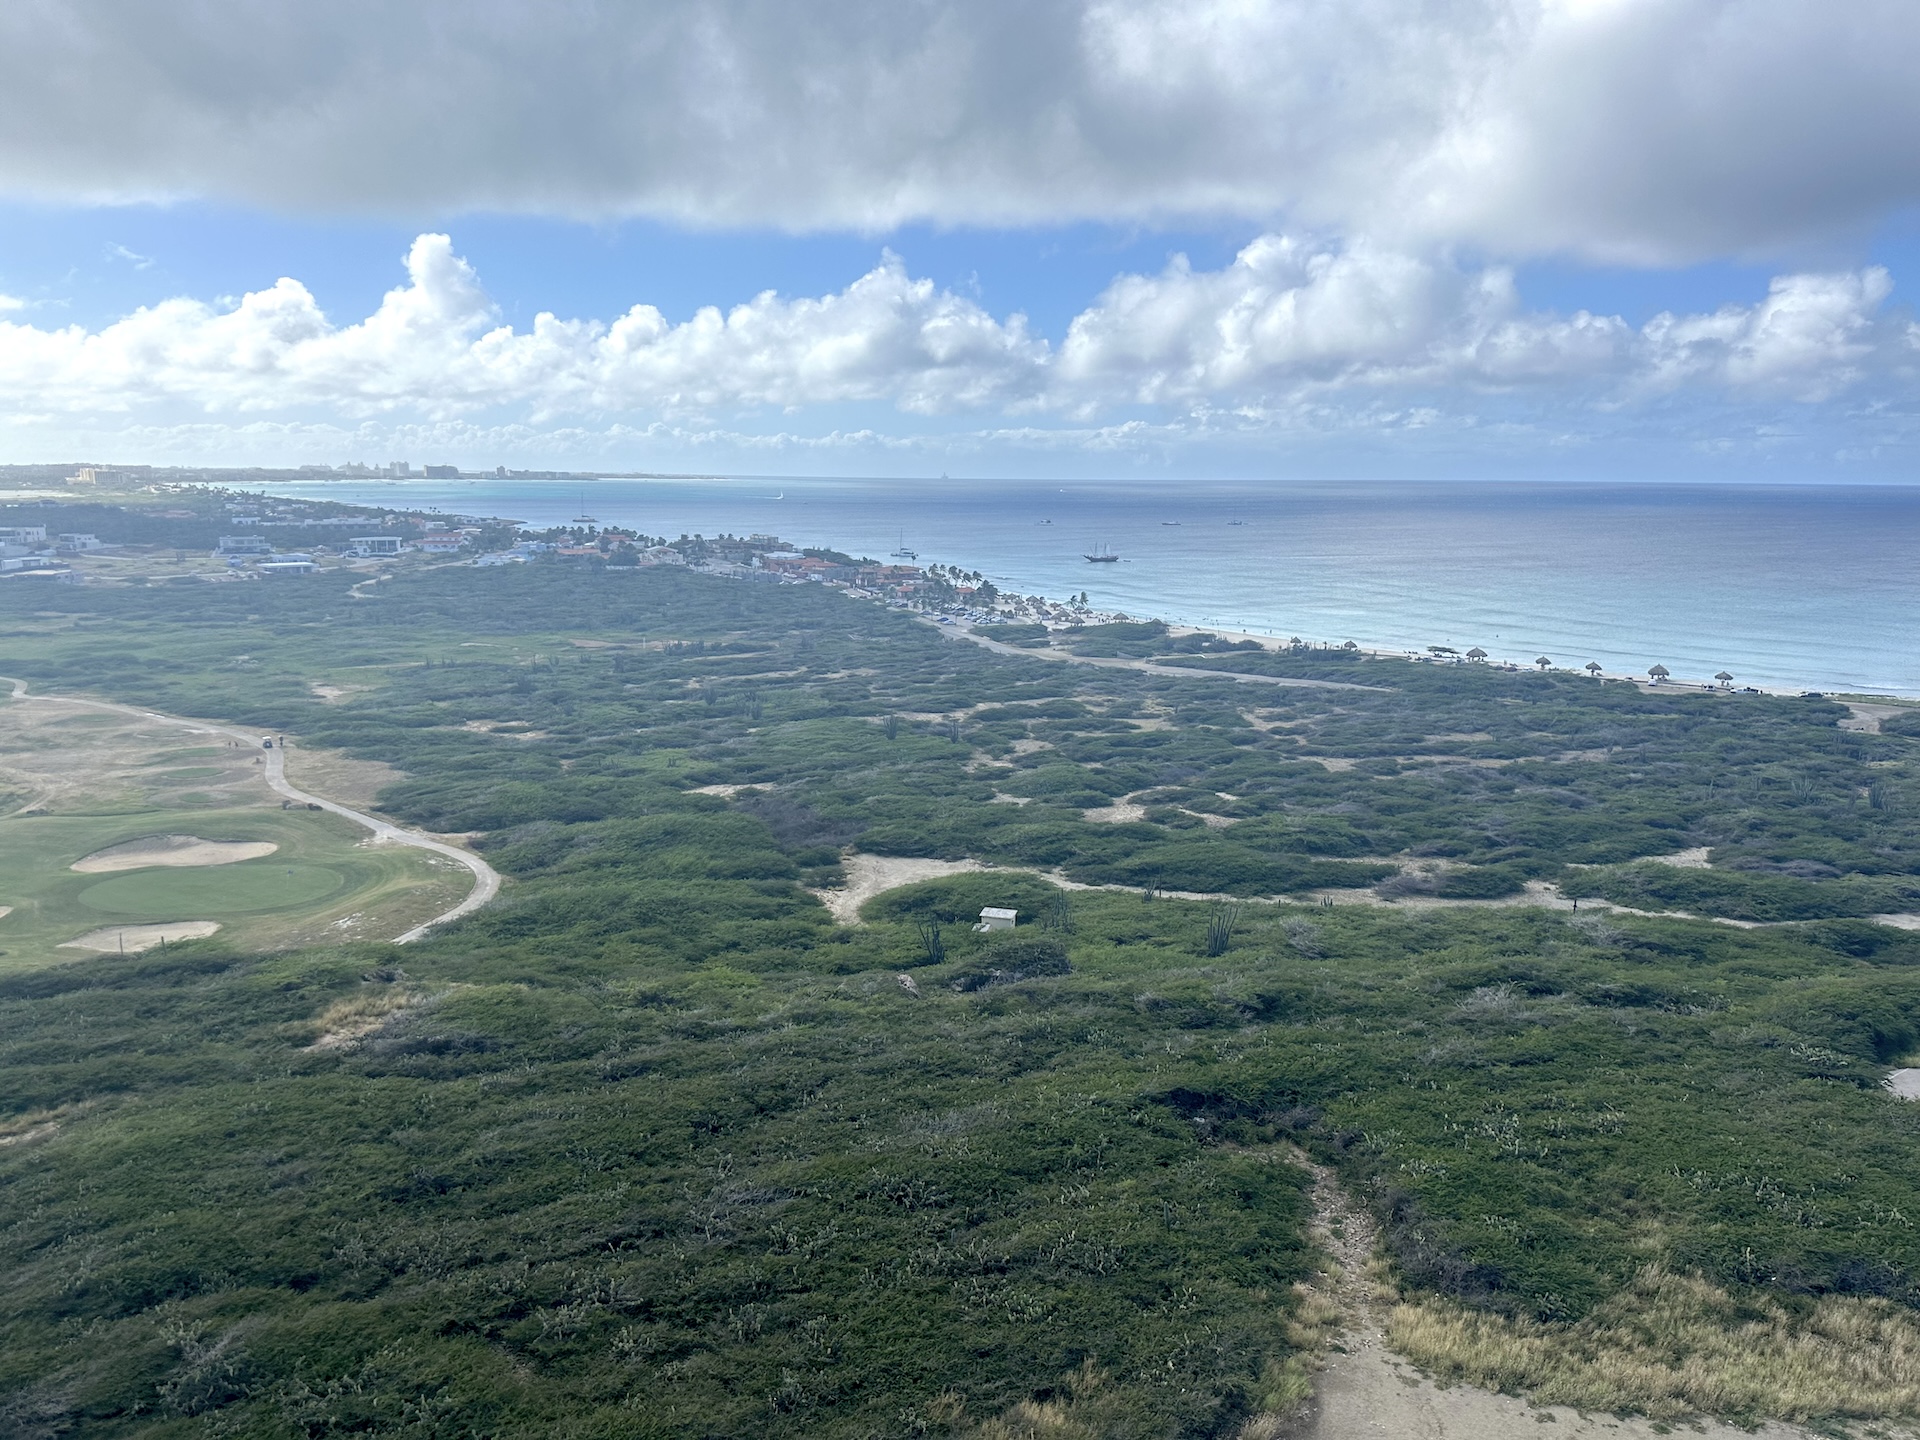 Looking south down the west coast of Aruba